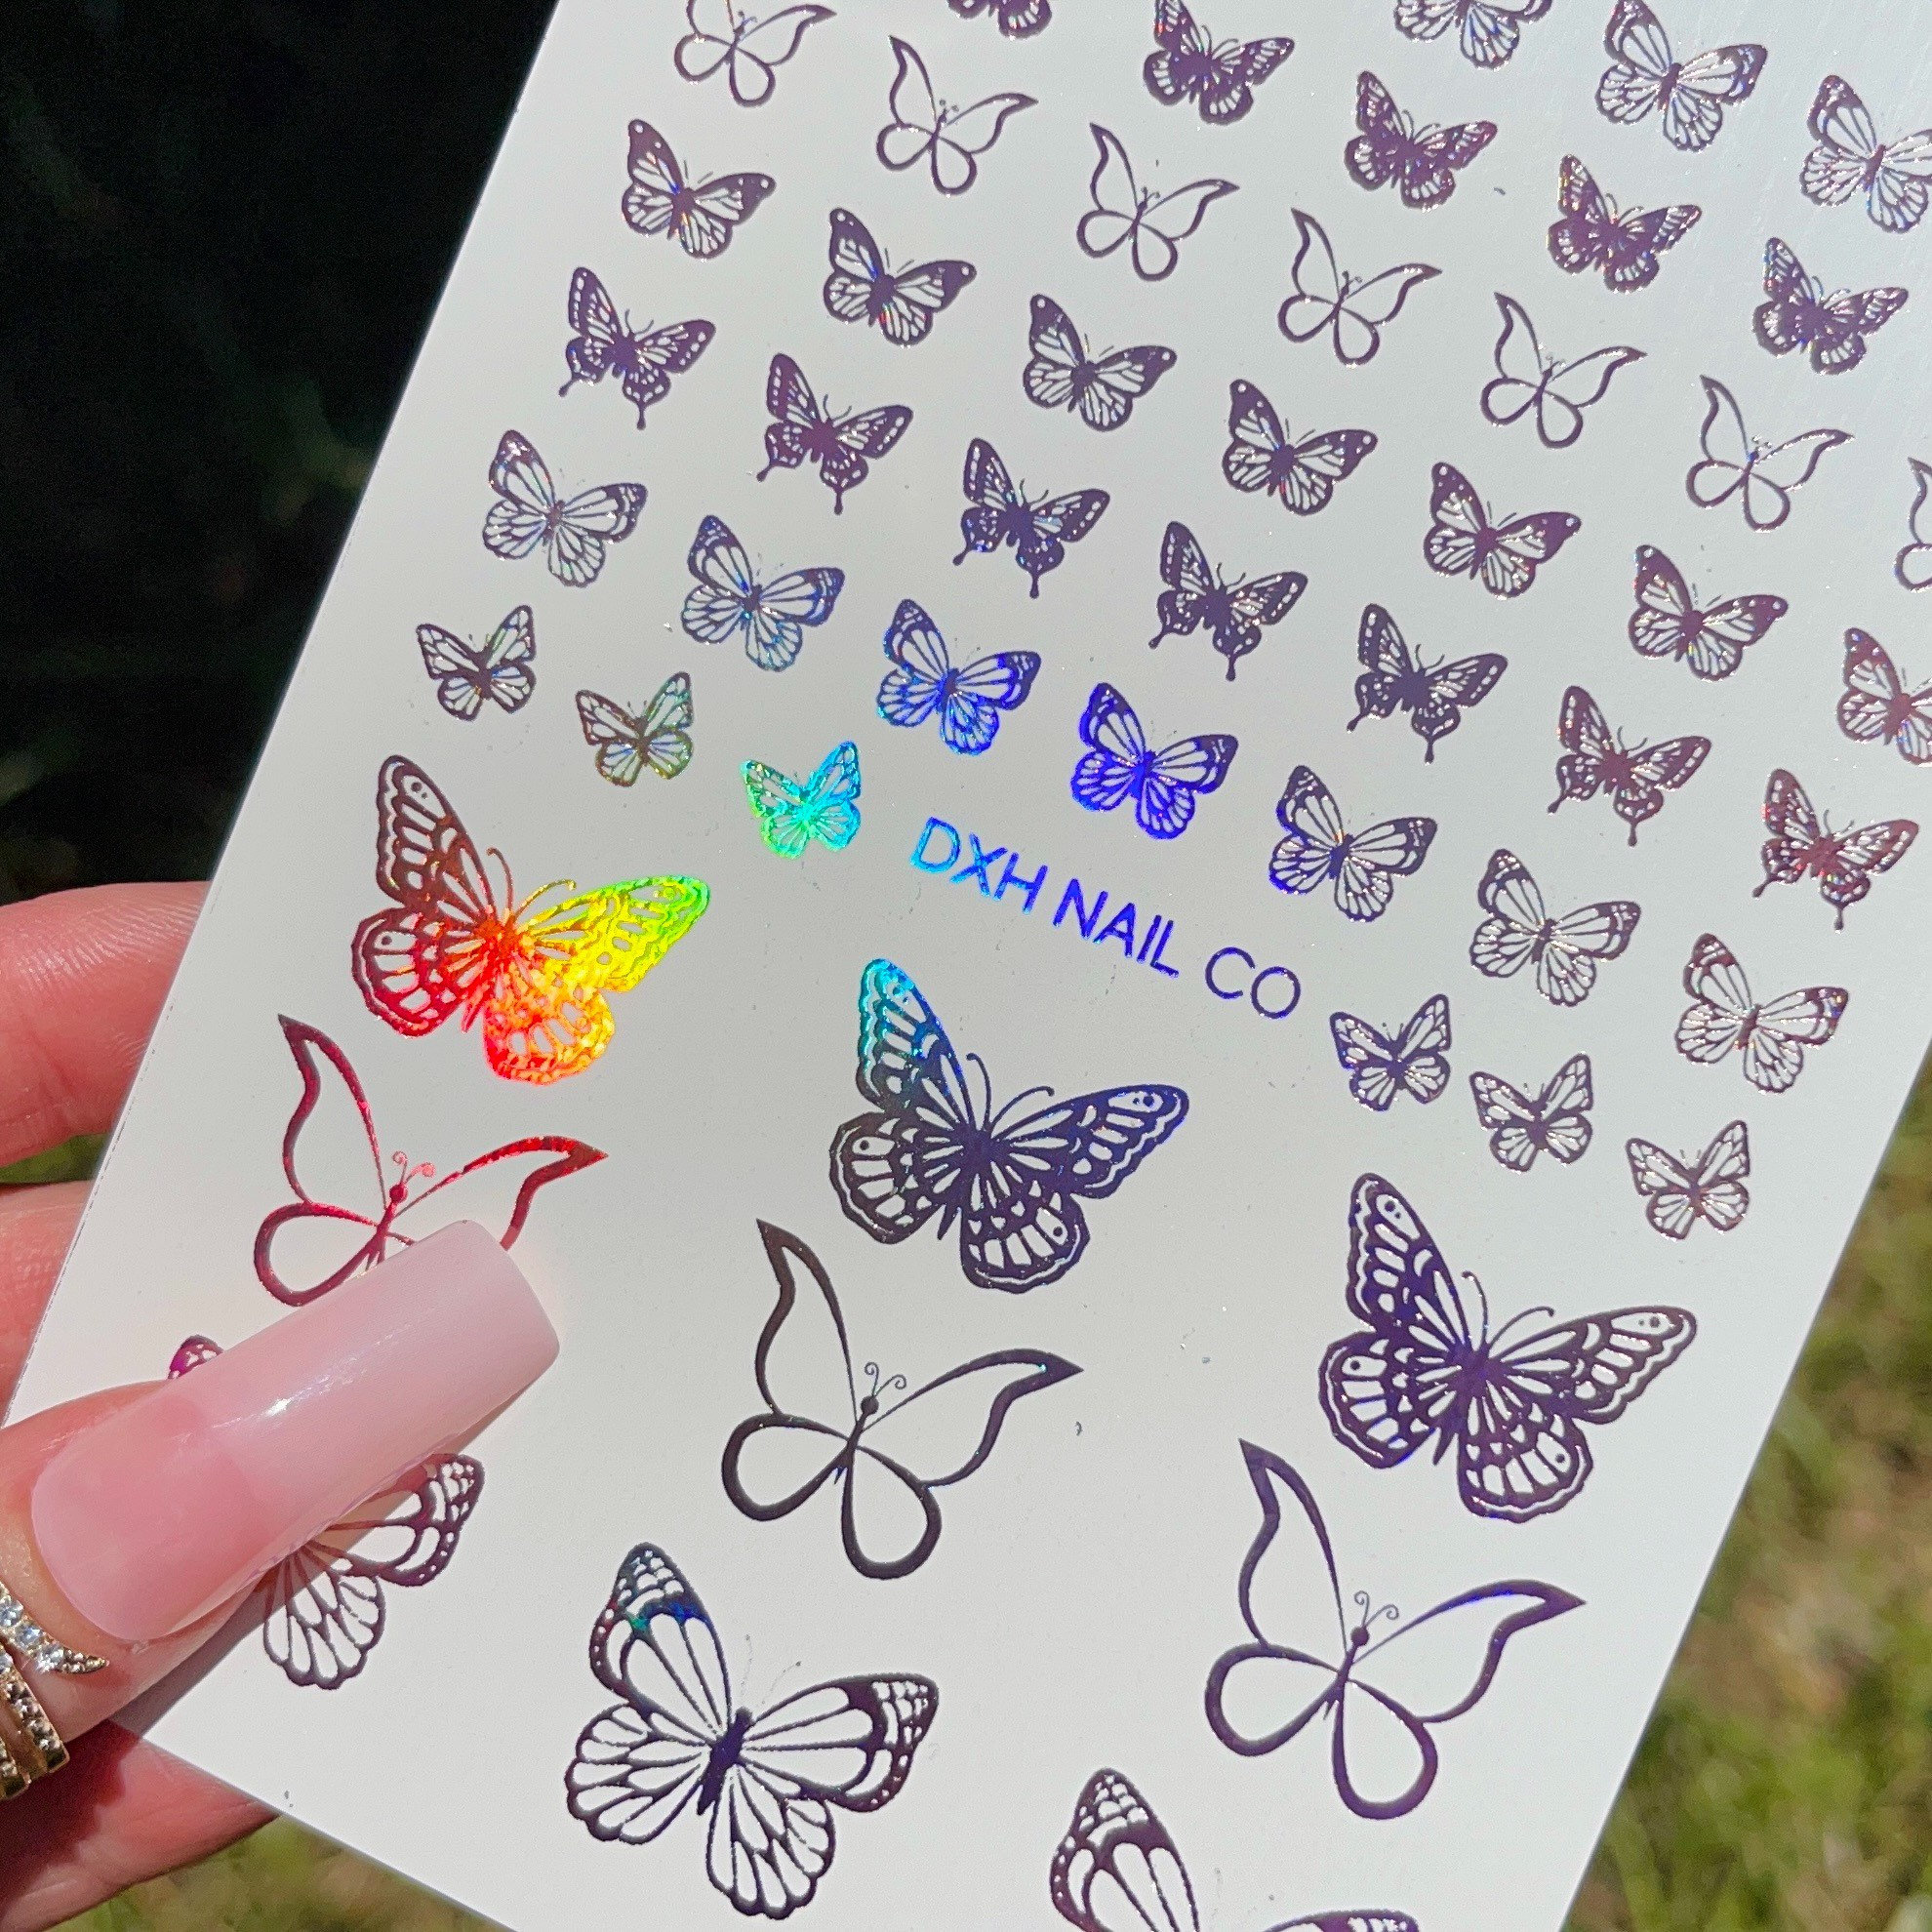 Buy 3D Butterfly Nail Art Decals Sticker Nails Supply Flowers Butterfly Nail  Art Stickers False Nails Designs Acrylic Nails Supplies Self-Adhesive Butterflies  Nail Art Decoration Accessories (6 Sheets) Online at Lowest Price